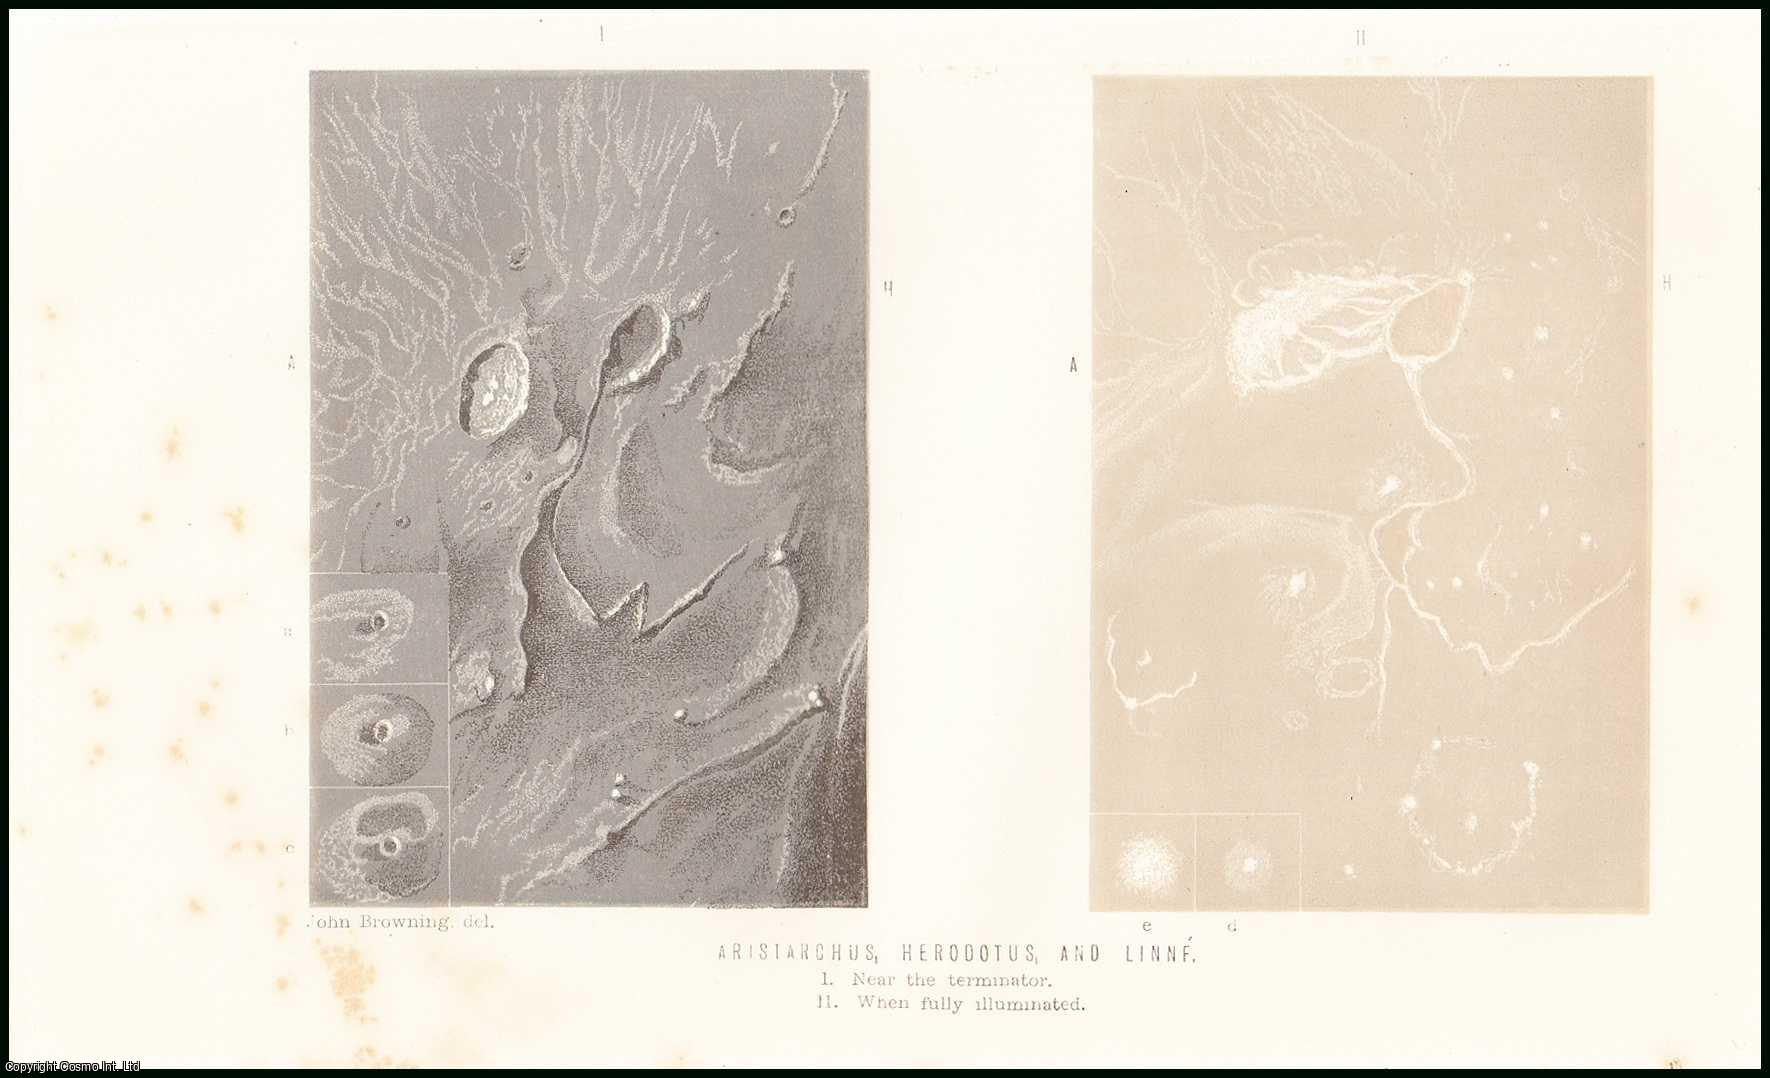 John Browning, F.R.A.S. - The Lunar Craters Aristarchus & Linne. An uncommon original article from the Student and Intellectual Observer of Science Literature & Art, 1869.